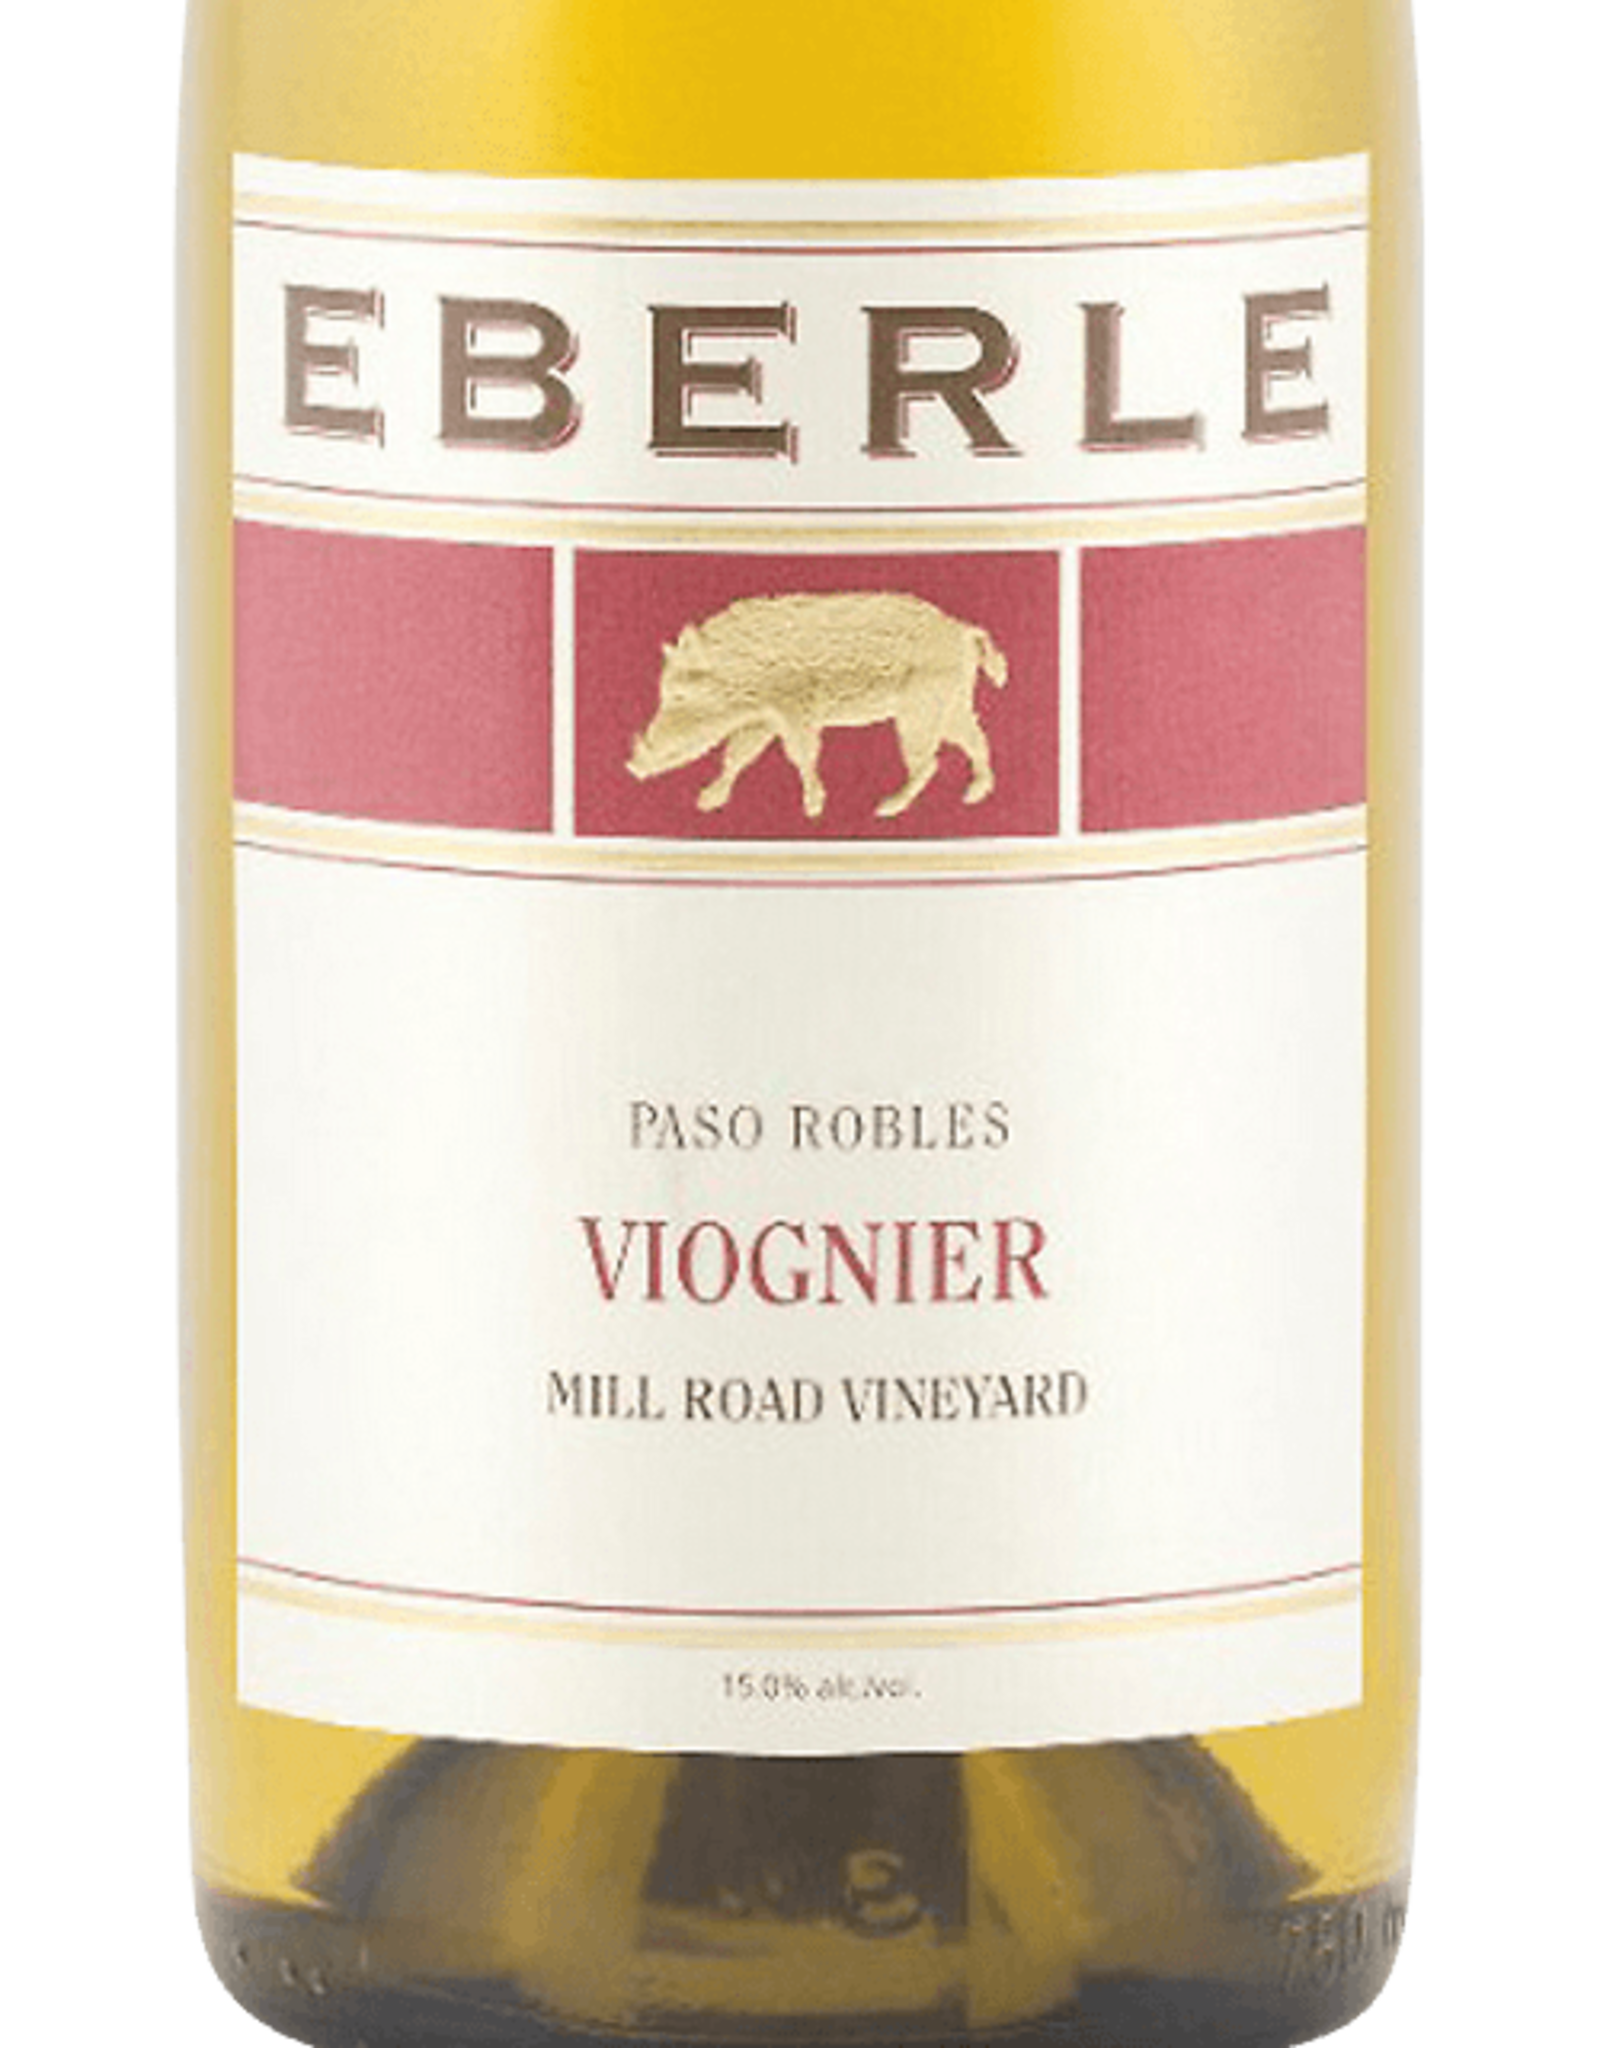 Eberle Winery Viognier Mill Road Vineyard Paso Robles 2017